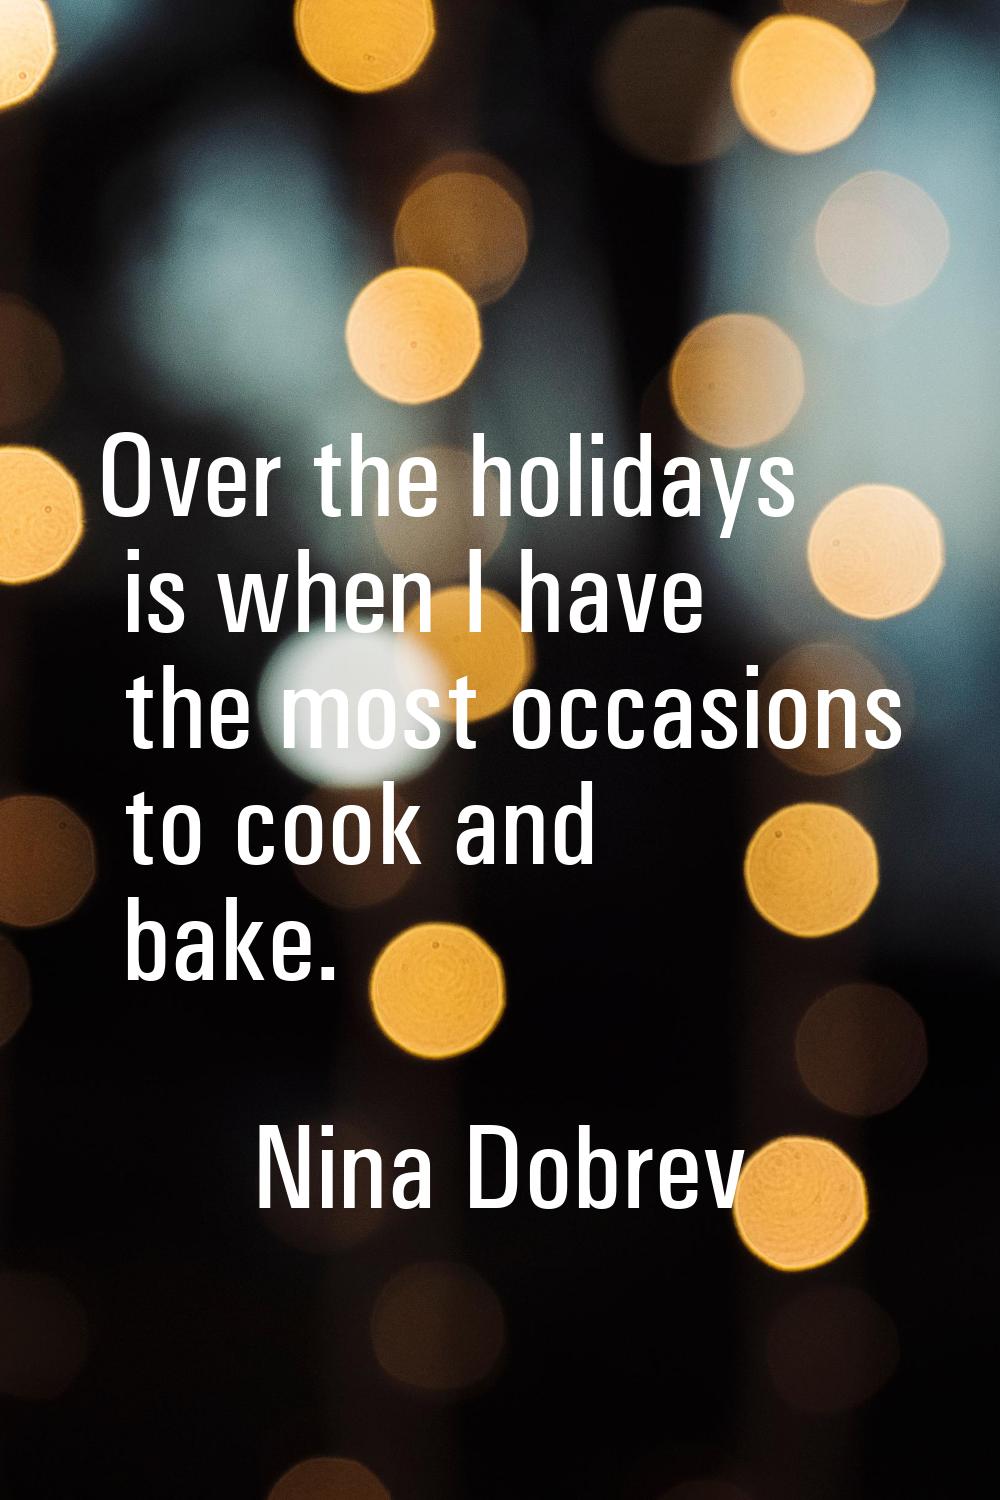 Over the holidays is when I have the most occasions to cook and bake.